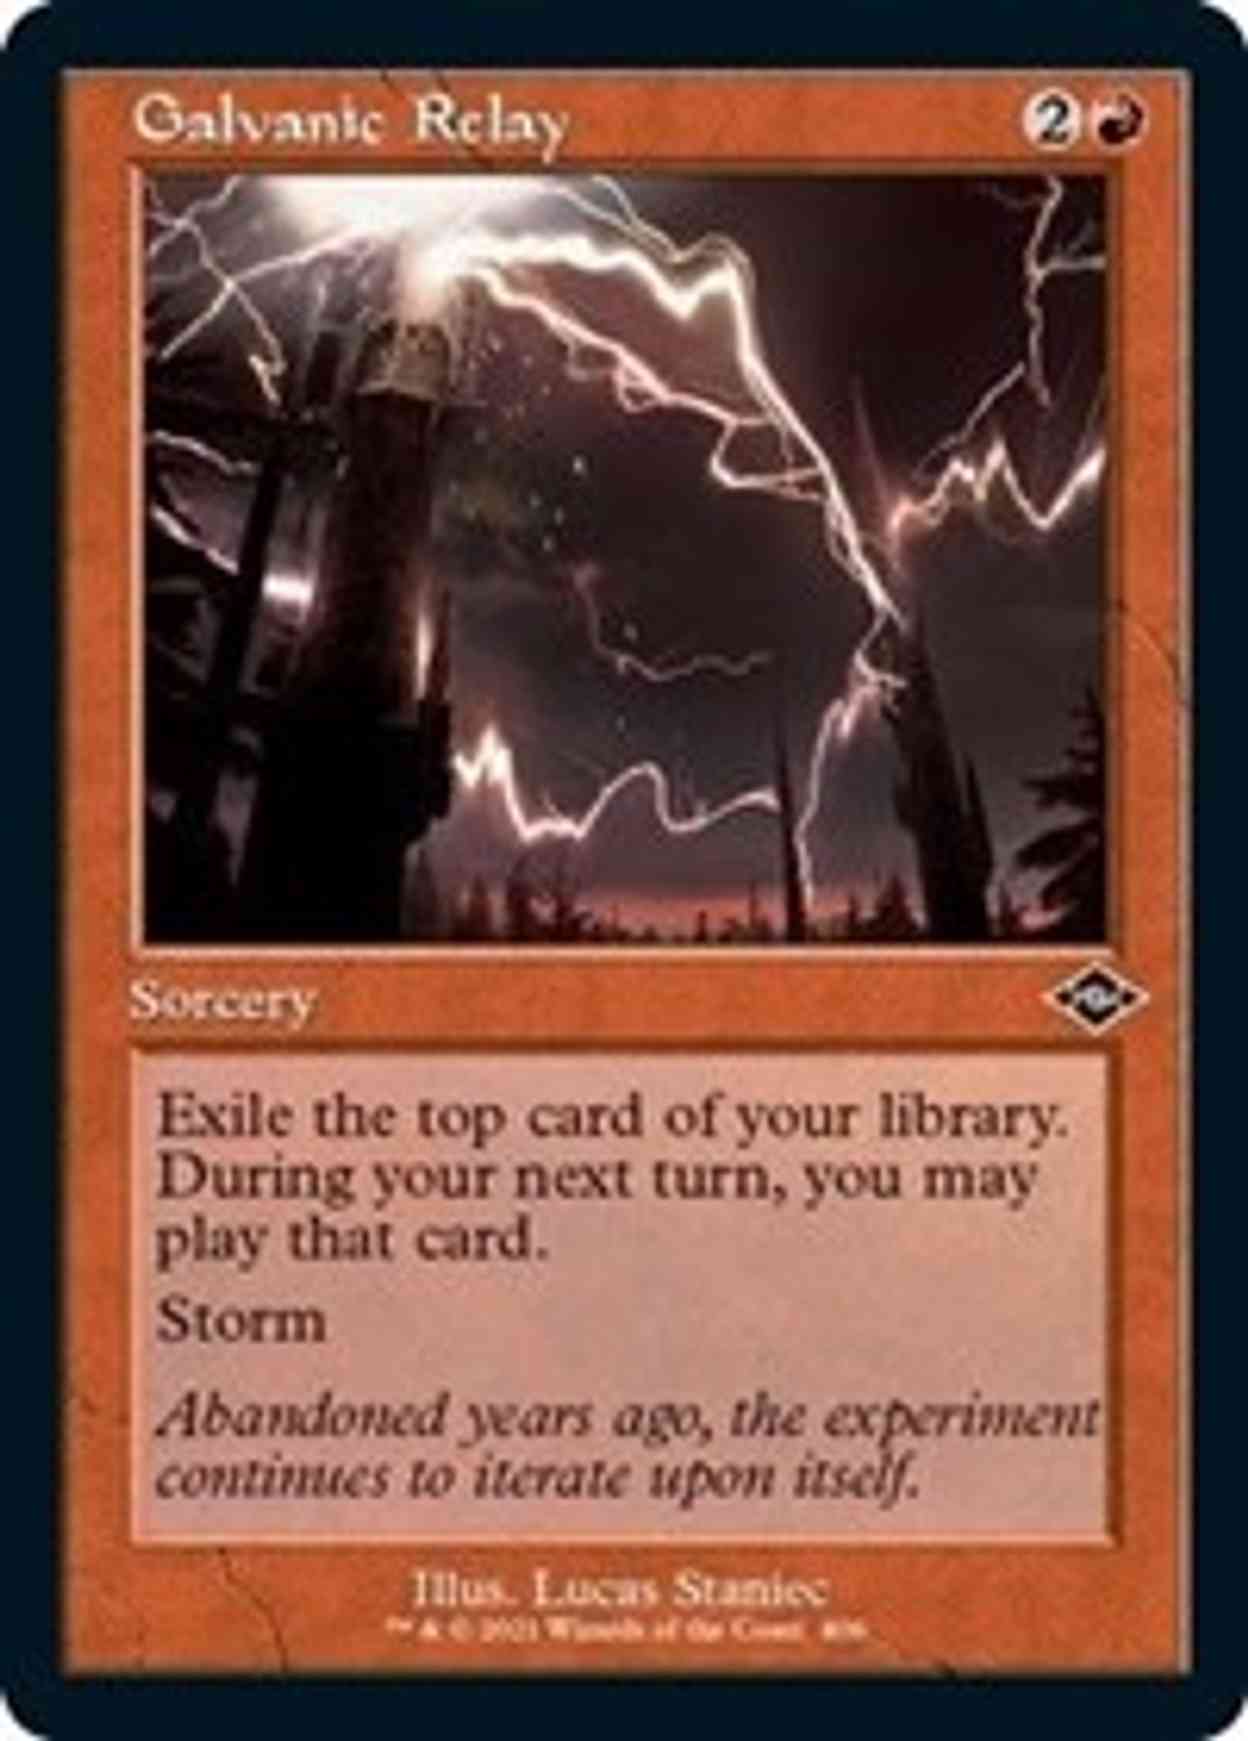 Galvanic Relay (Retro Frame) (Foil Etched) magic card front